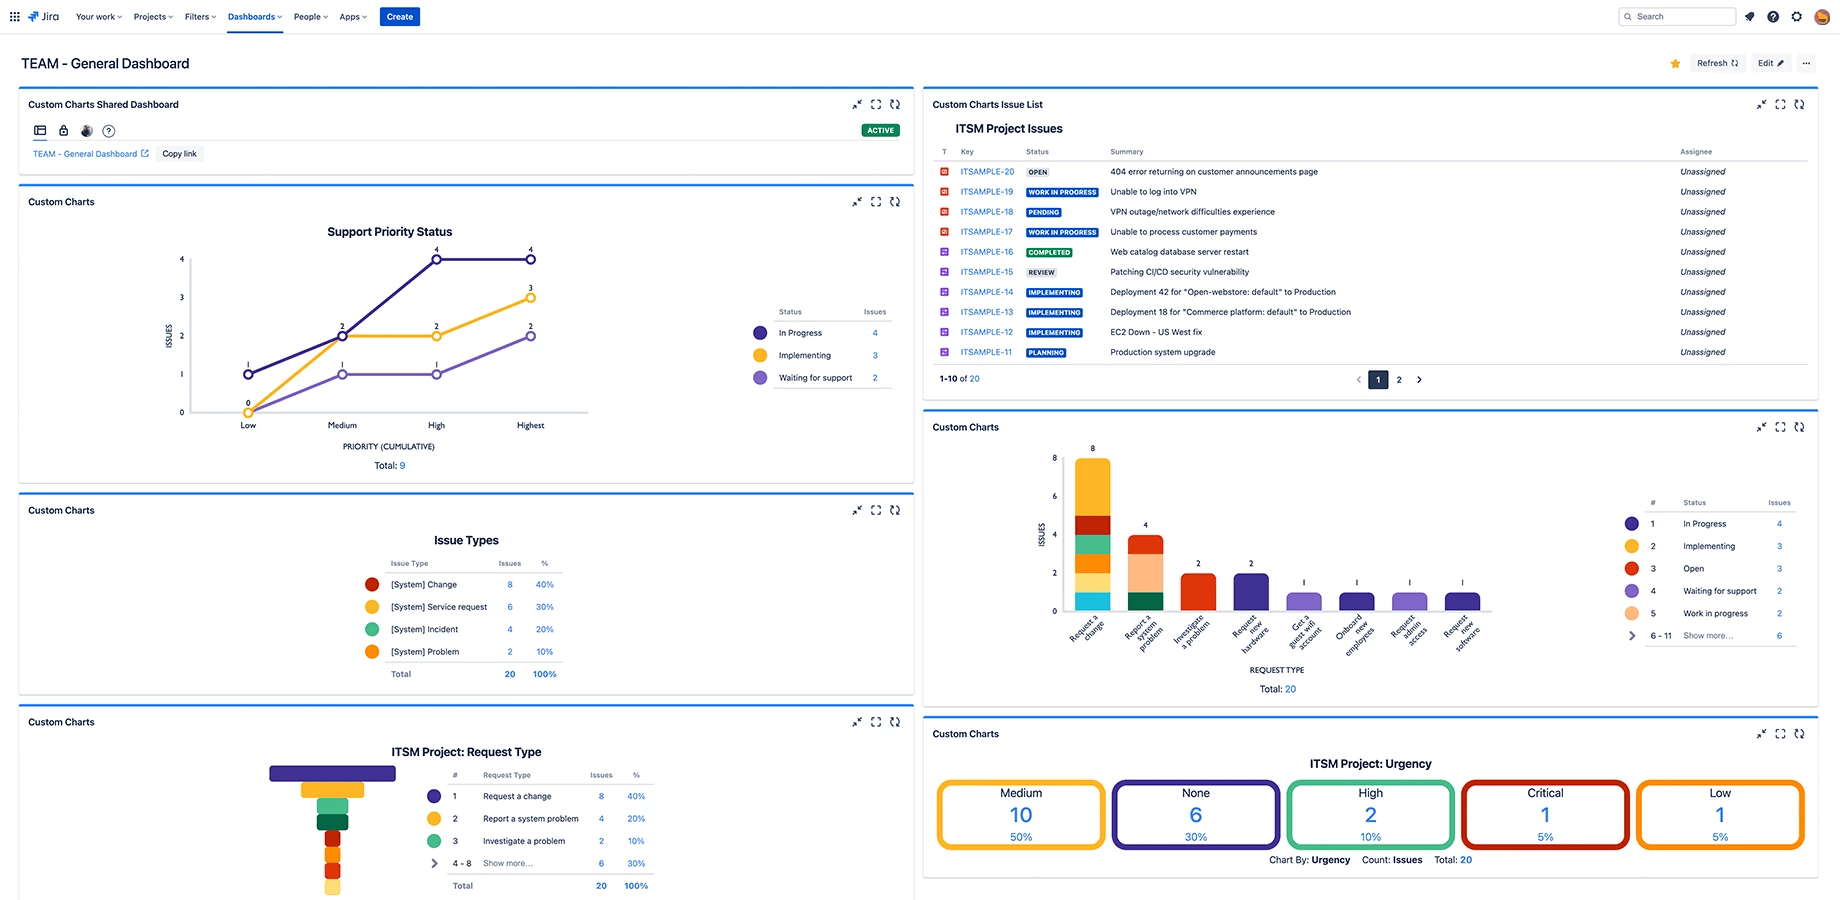 Customizable bar & line charts directly in Jira. Use our interactive app playground to test 10+ Jira, JSM and Confluence reporting use cases real time. Learn how to build Agile or Sprint Reports using simple functions like drag-n-drop, and color picker.